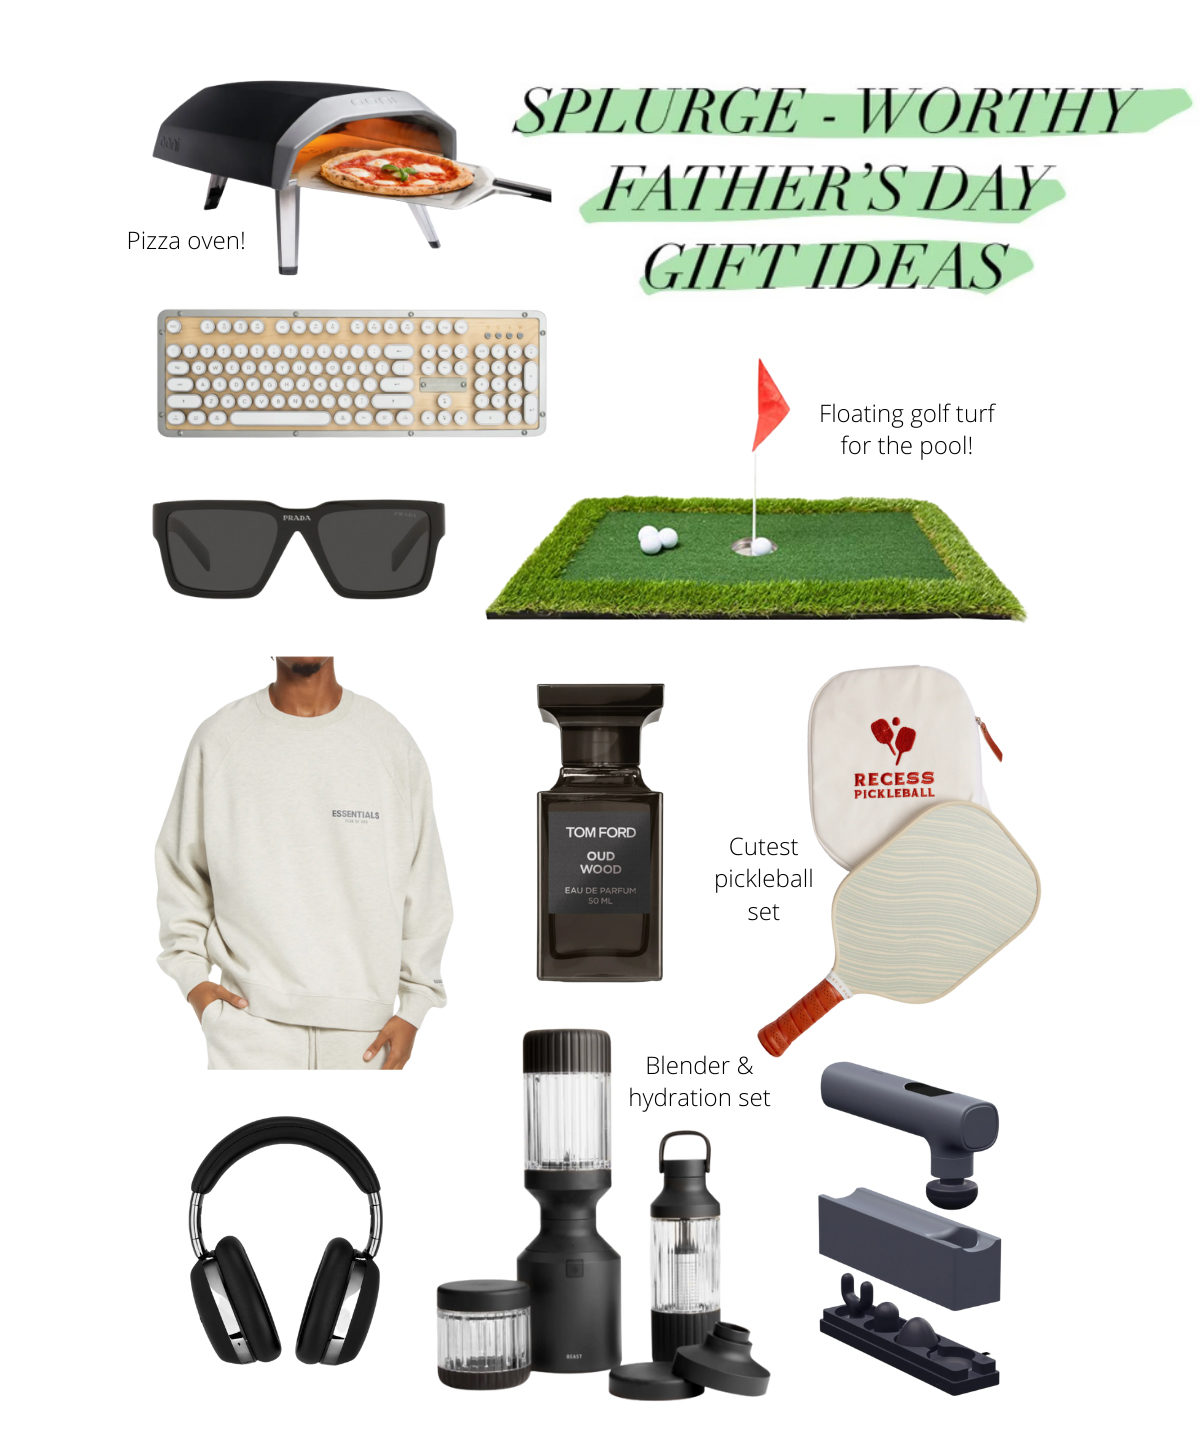 fathers day gift ideas, splurge-worthy gifts, fathers day, essentials sweatshirt, pizza oven, retro keyboard, floating golf turf, pickeball set, sunglasses, Tom Ford cologne, blender set, noise cancelling headphones, handheld massage gun